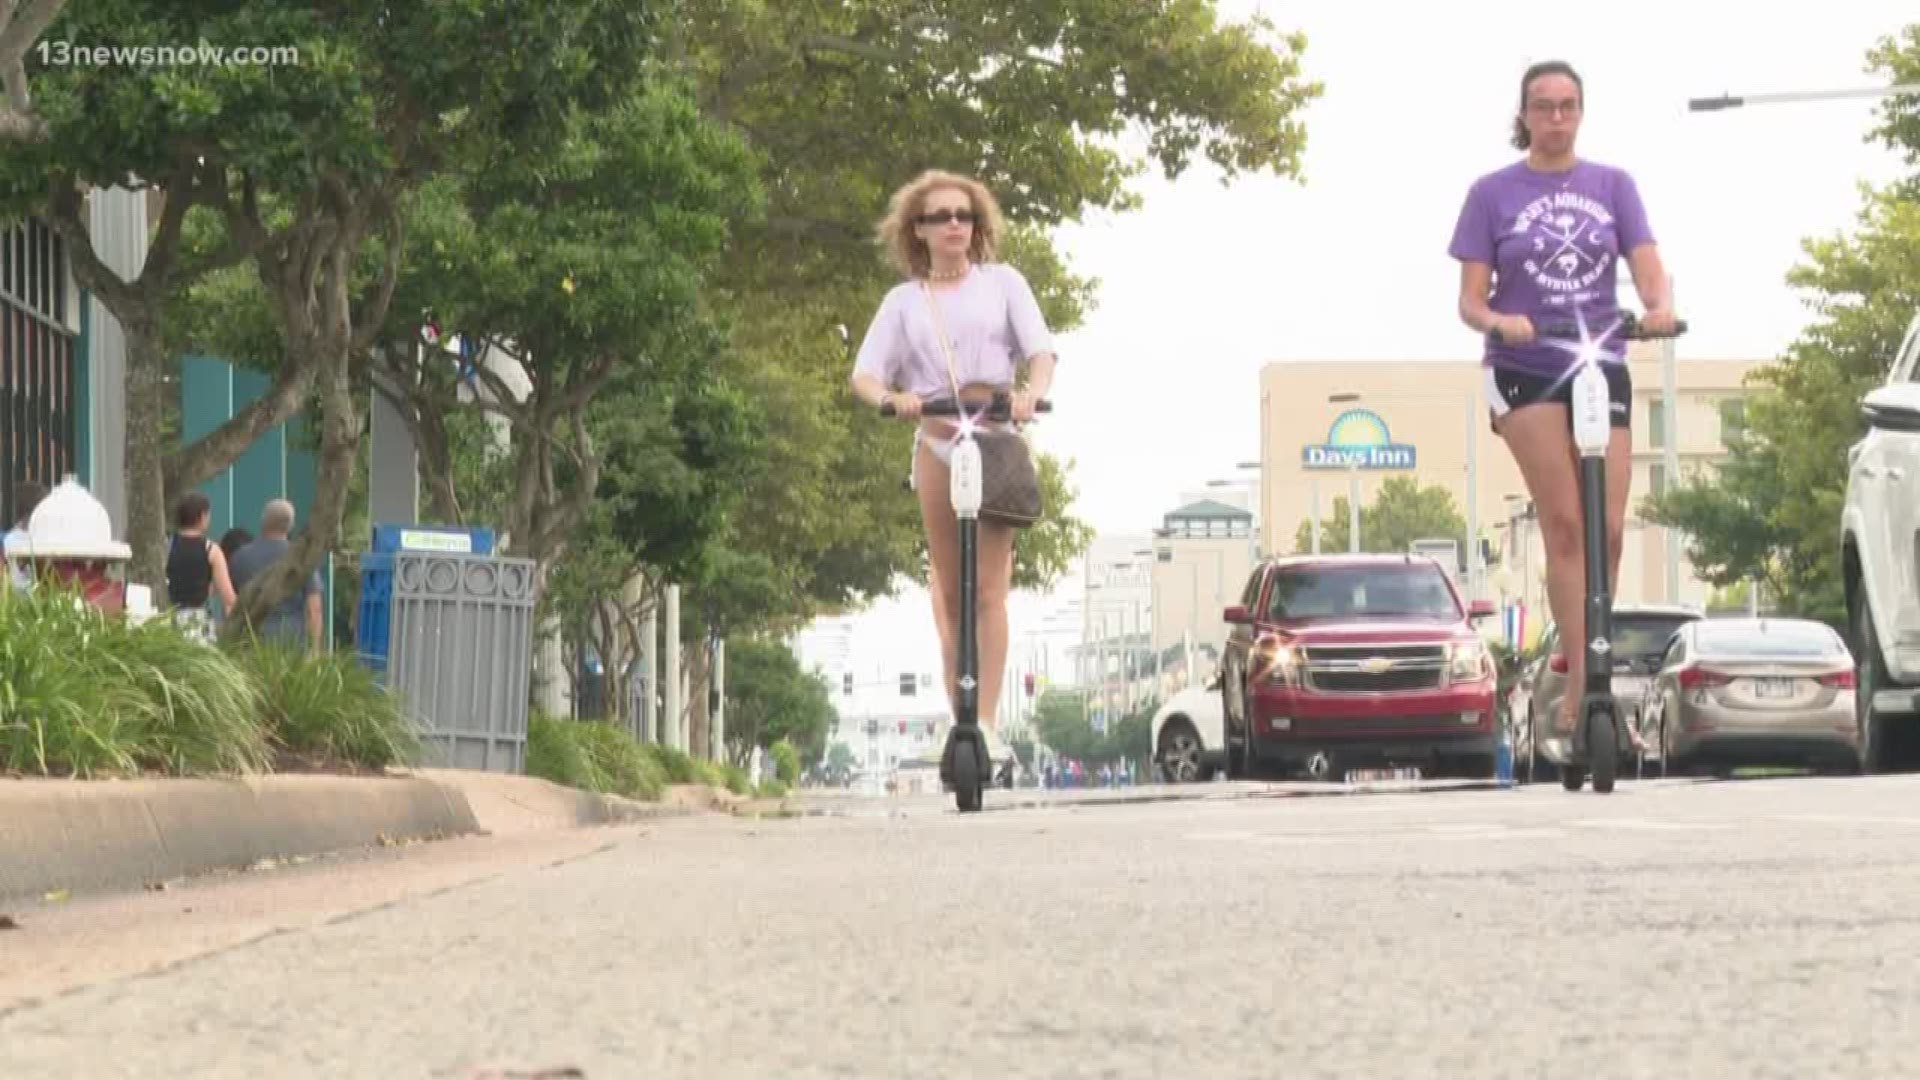 Virginia Beach City Council could ban the scooters from the resort area, at least temporarily, over safety concerns. In a meeting last week, they talked about how the scooters have already resulted in people getting injured and many people not obeying rules, such as wearing helmets and where to properly ride them.